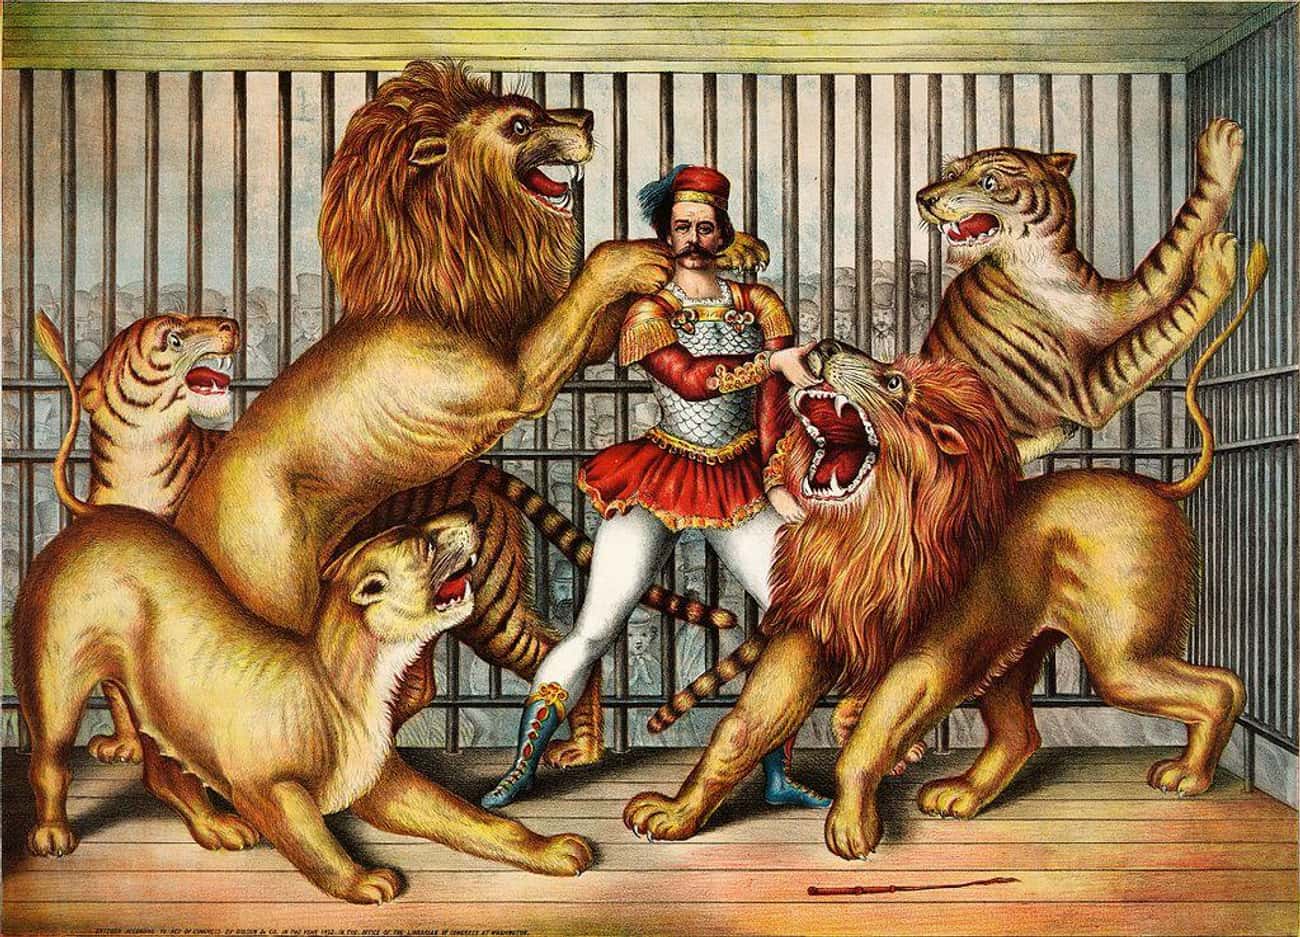 He Worked In A Circus As A Lion Tamer